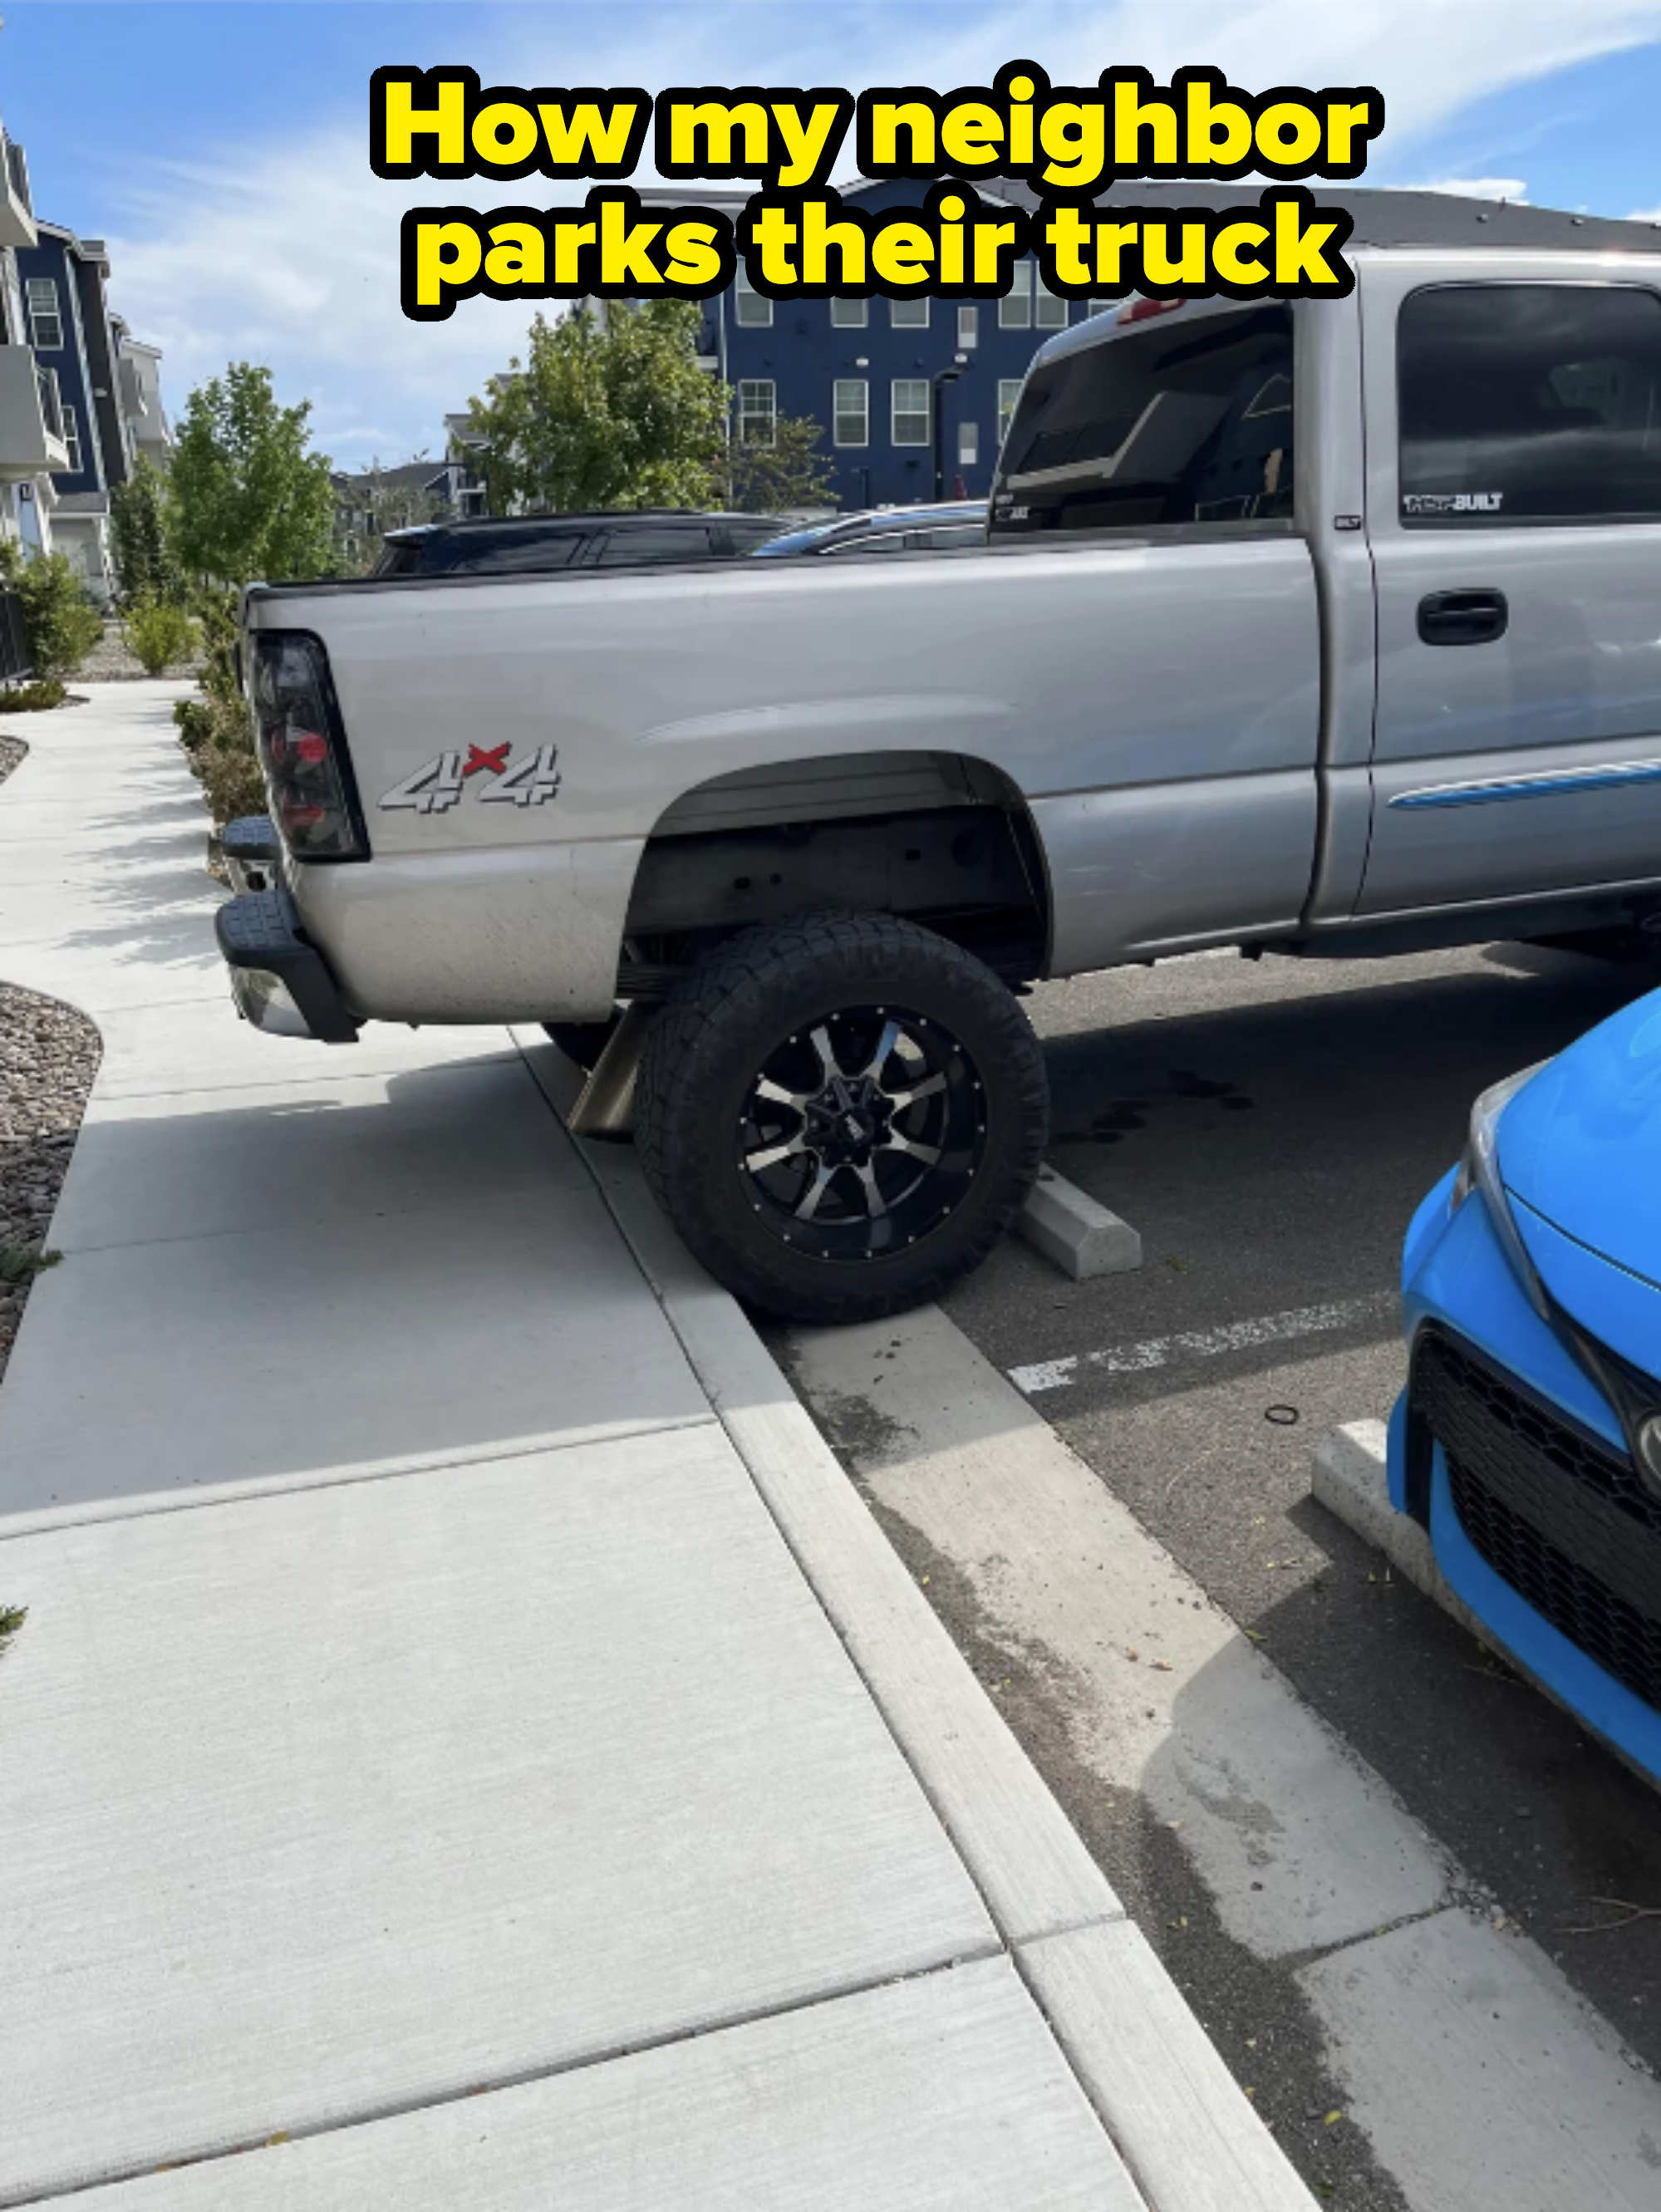 A raised truck with large wheels is parked on a curb, partially on the sidewalk, in a residential neighborhood. A blue car is parked beside it